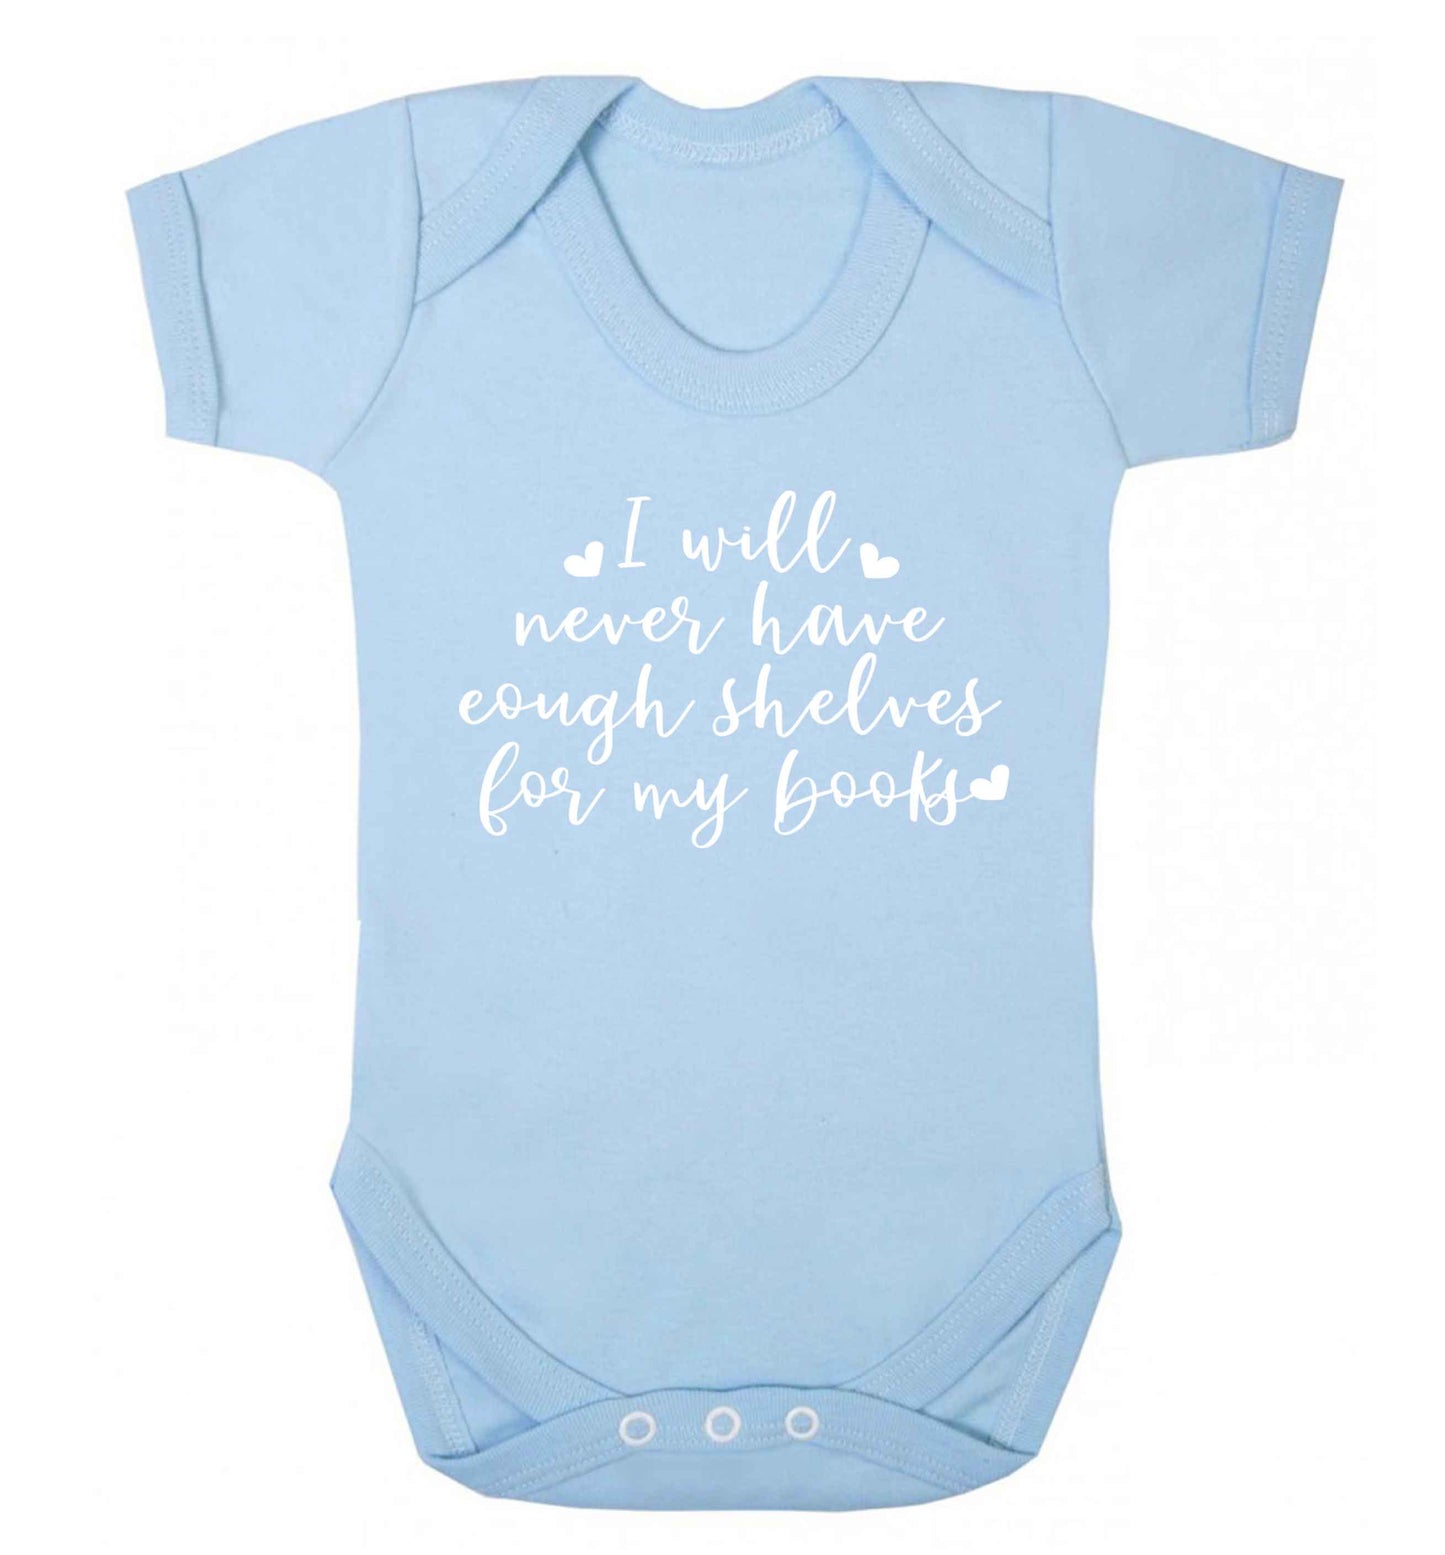 I will never have enough shelves for my books Baby Vest pale blue 18-24 months